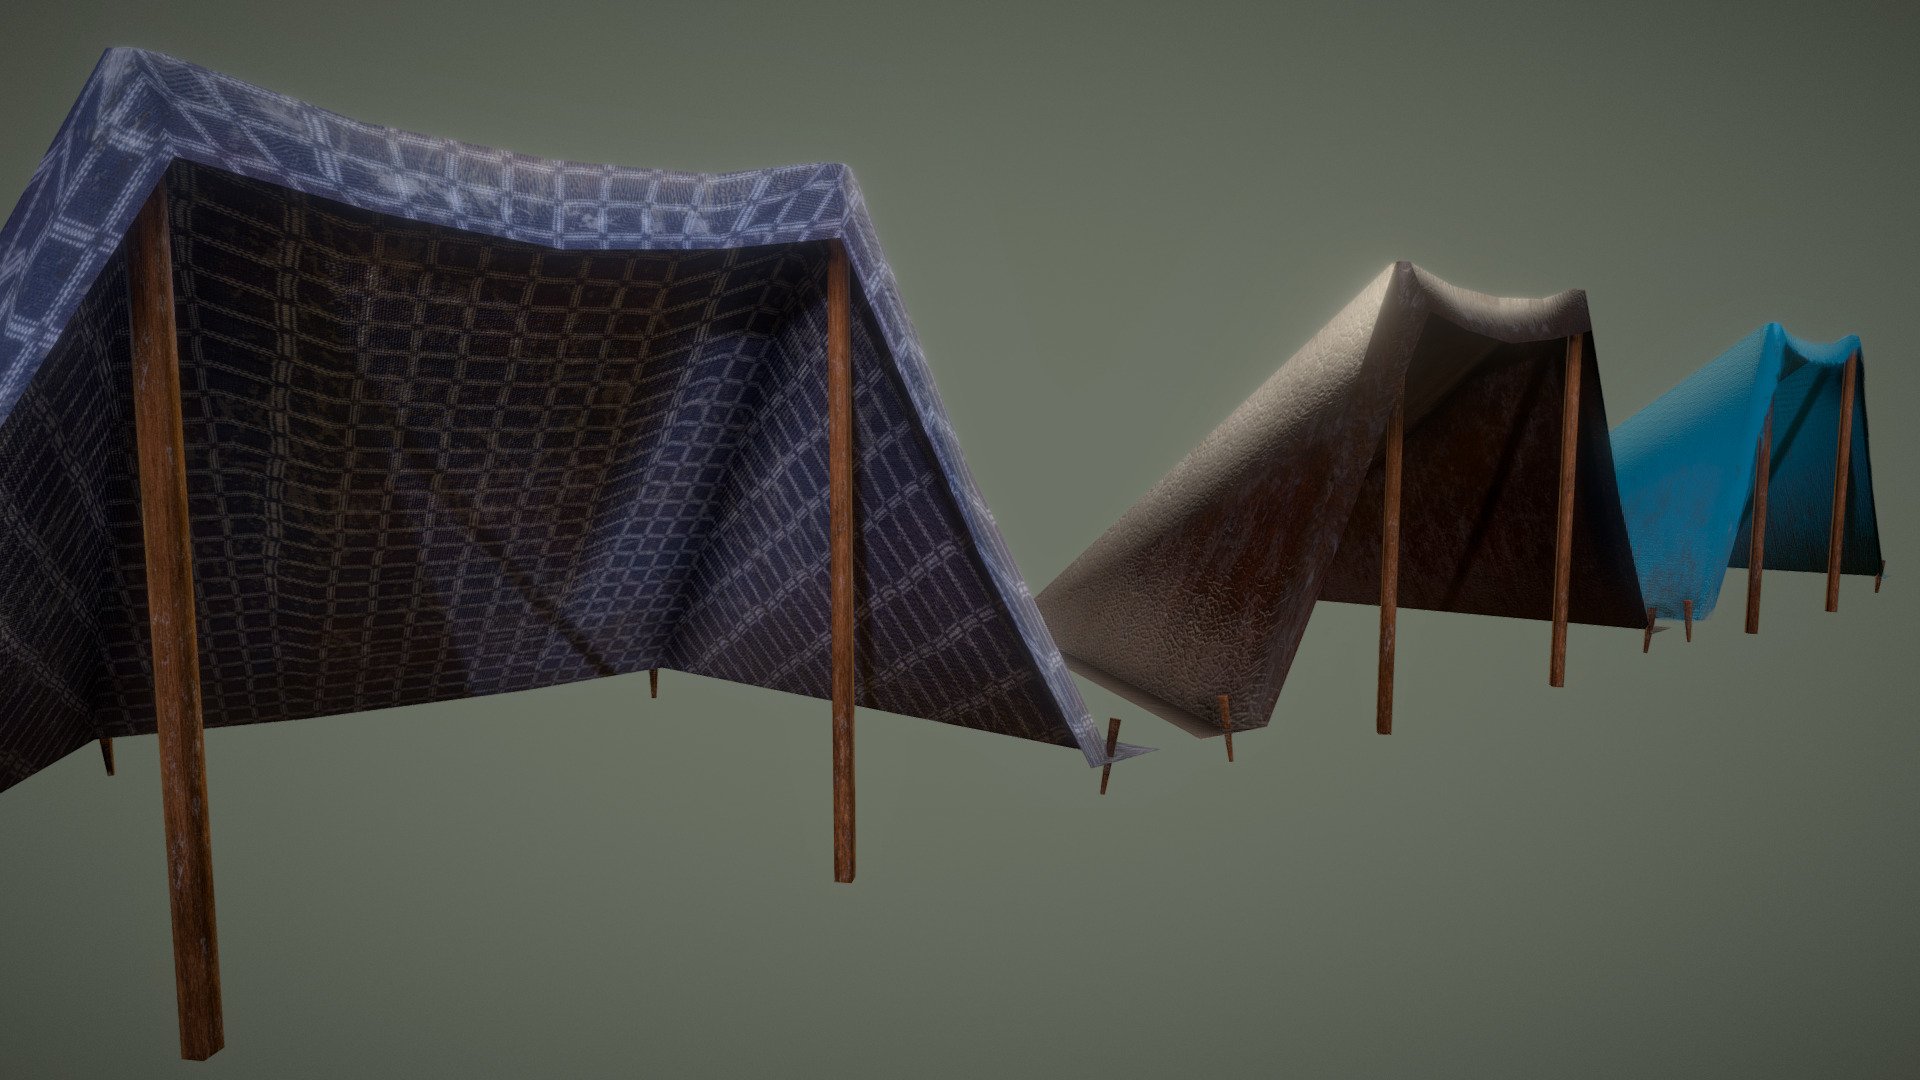 Here are some basic tents for merchants or shade-seeking NPCs to occupy in a game. I've made two fabric types and one leather type 3d model